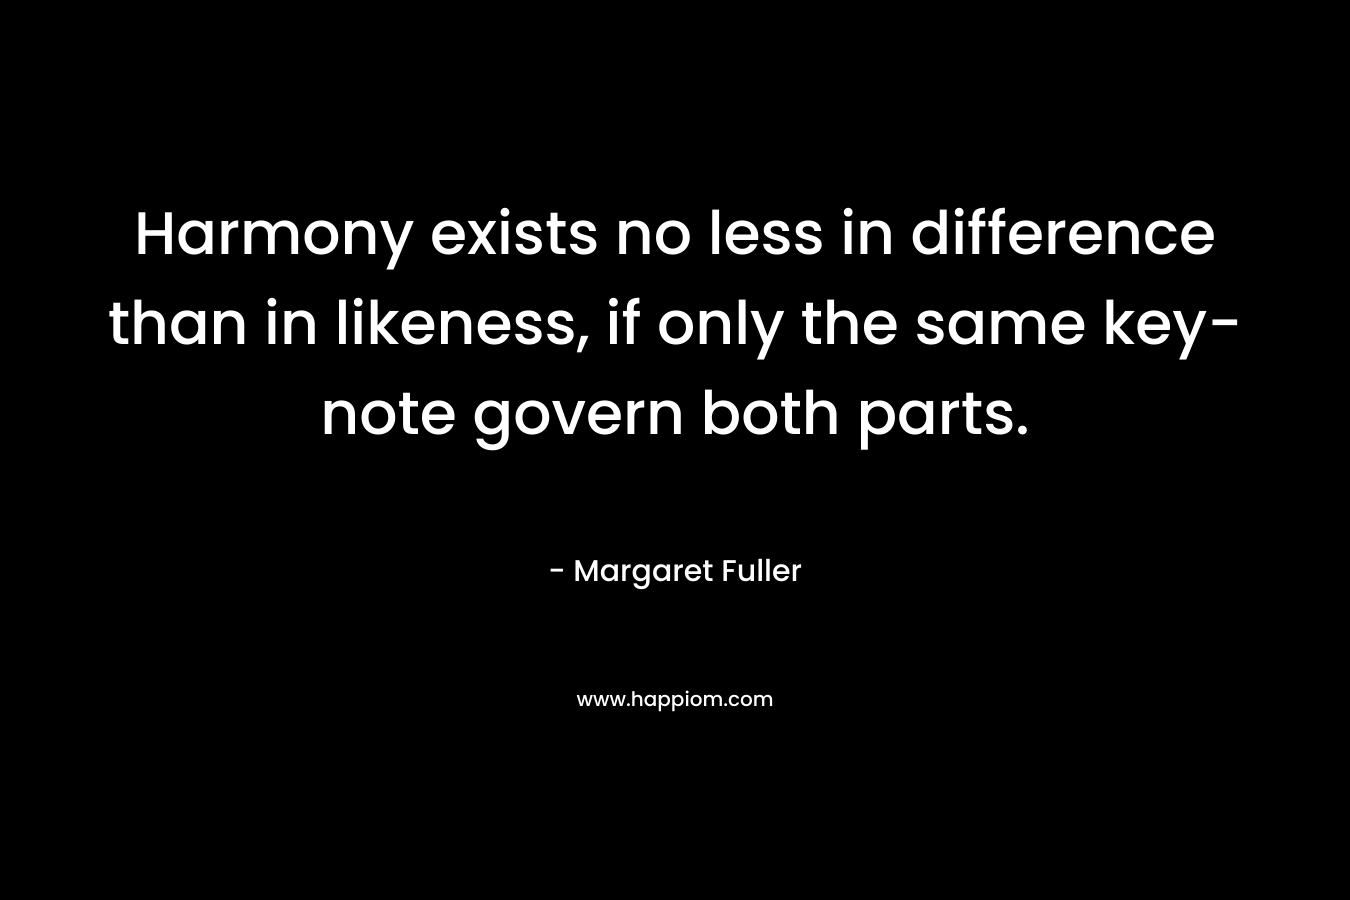 Harmony exists no less in difference than in likeness, if only the same key-note govern both parts. – Margaret Fuller